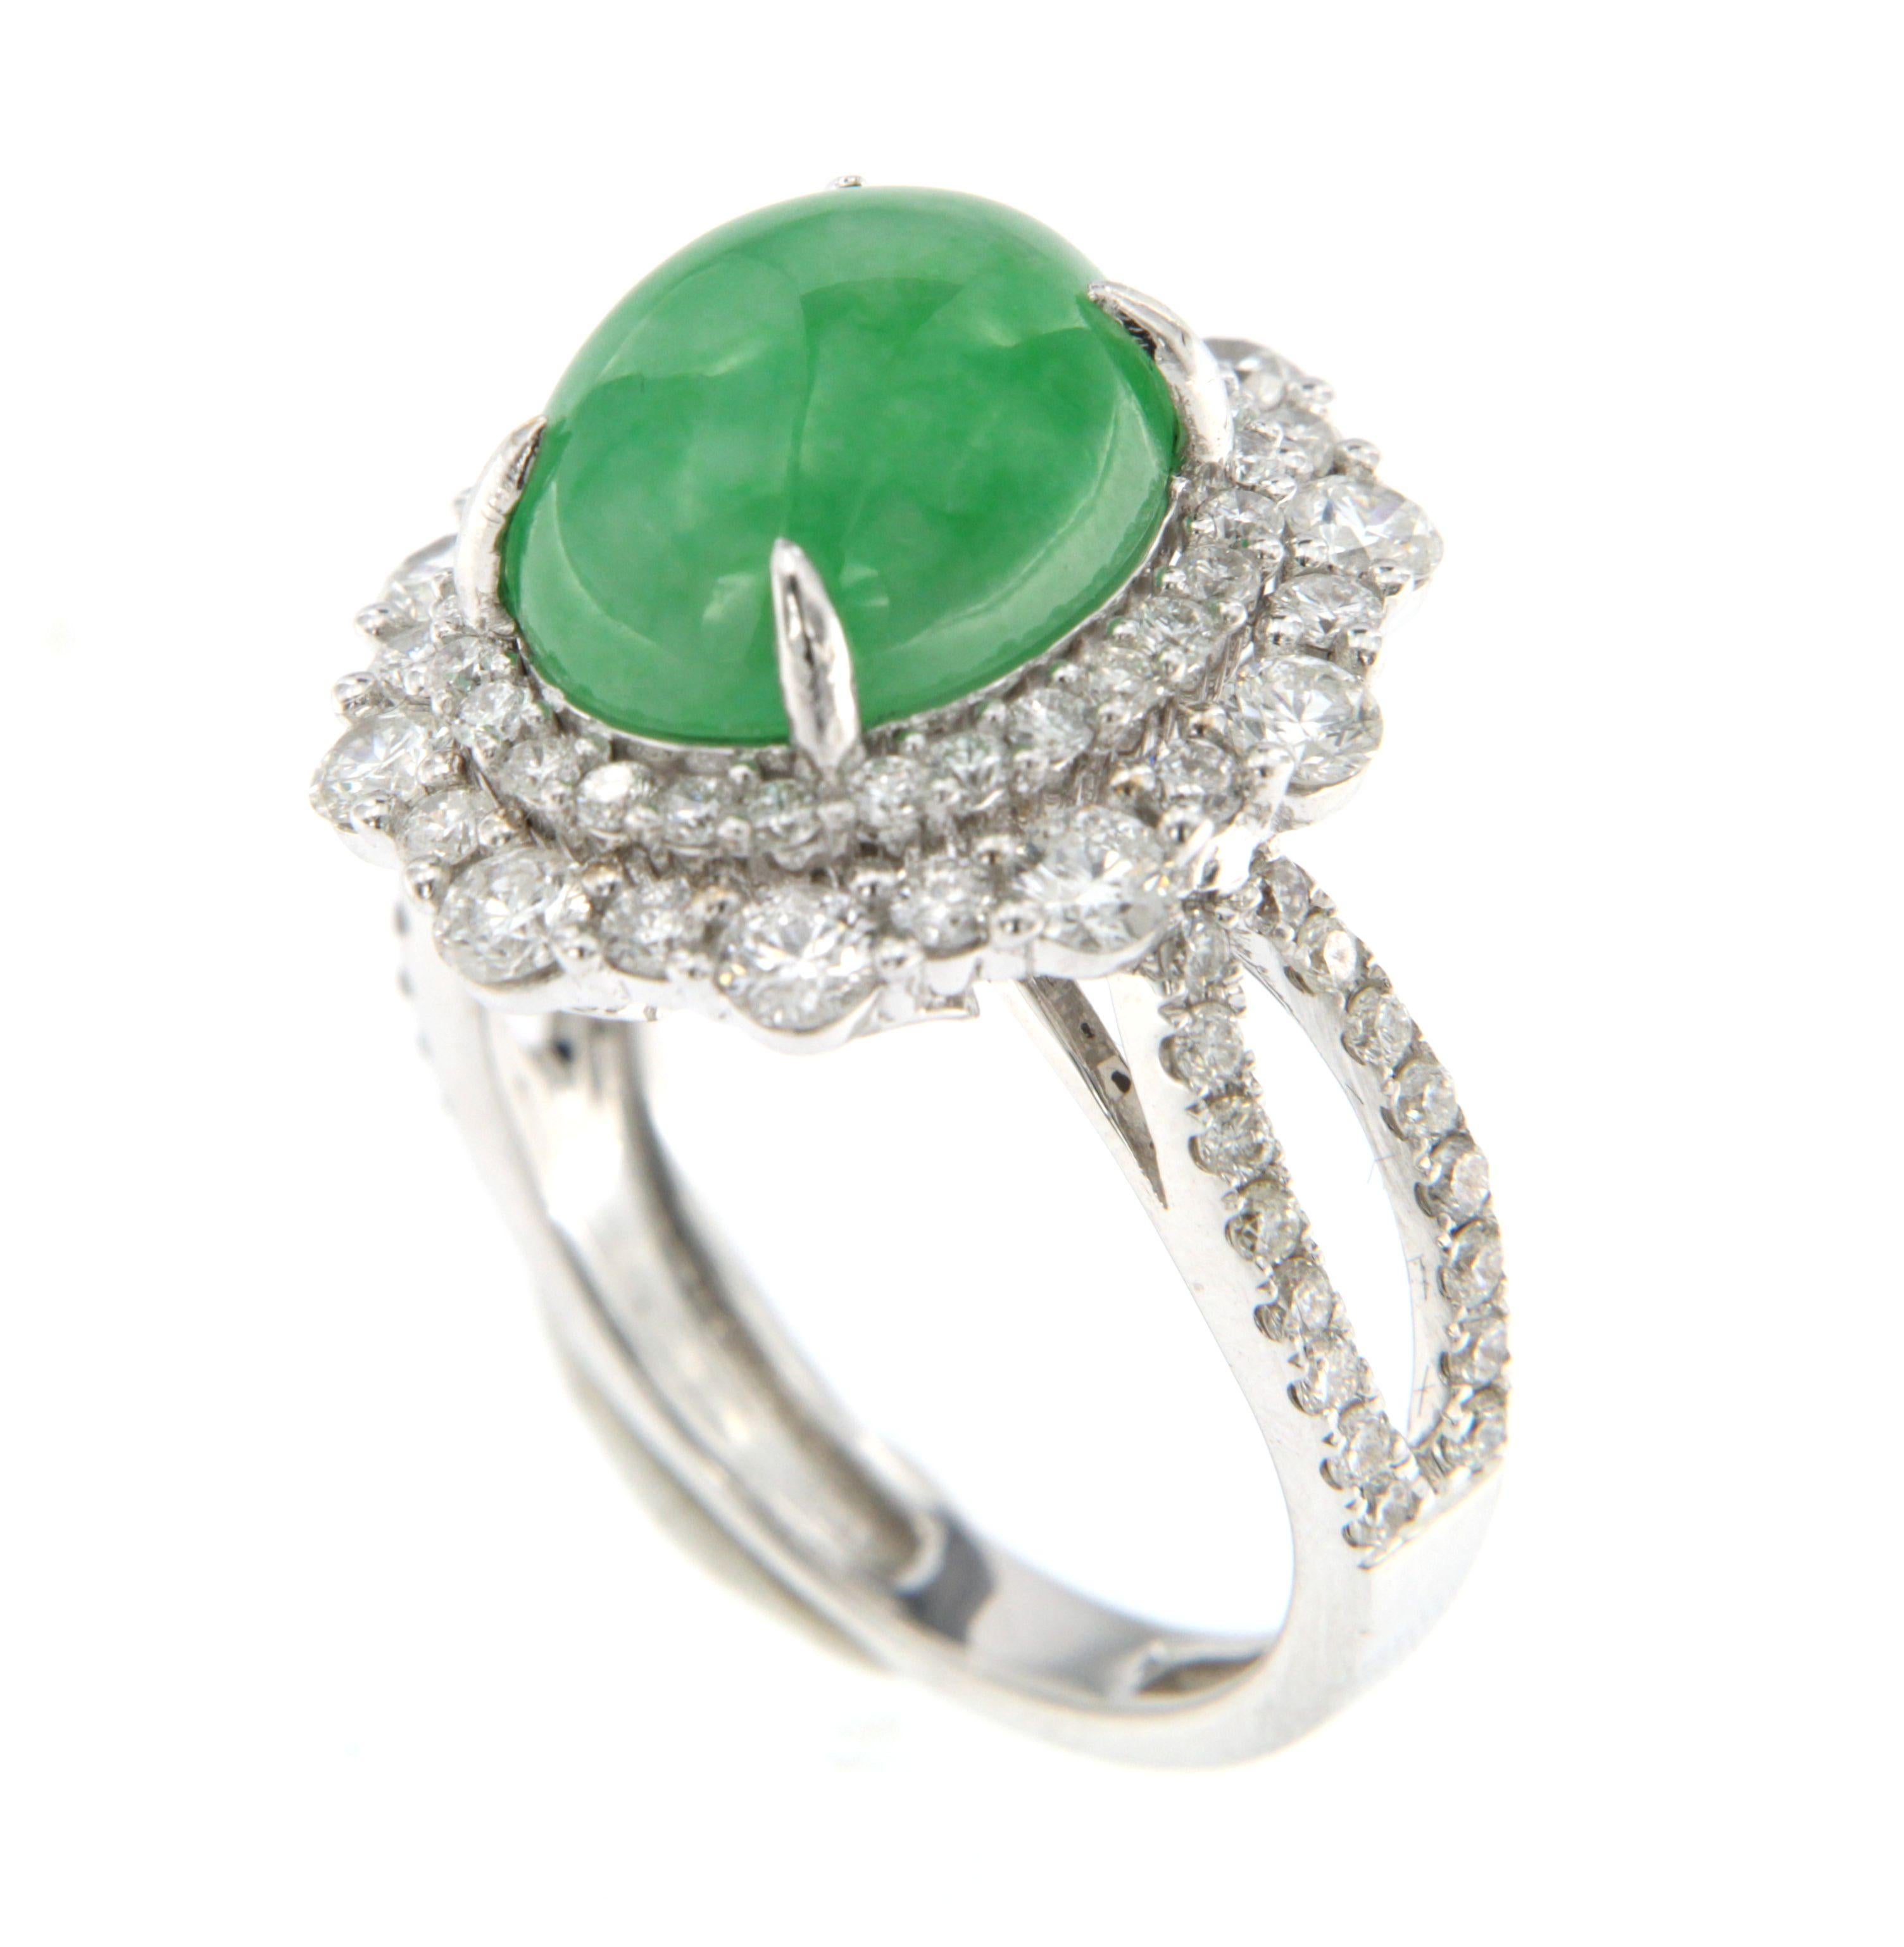 Contemporary 5.95Ct Jadeite and Diamond Ring in 18 Karat White Gold For Sale